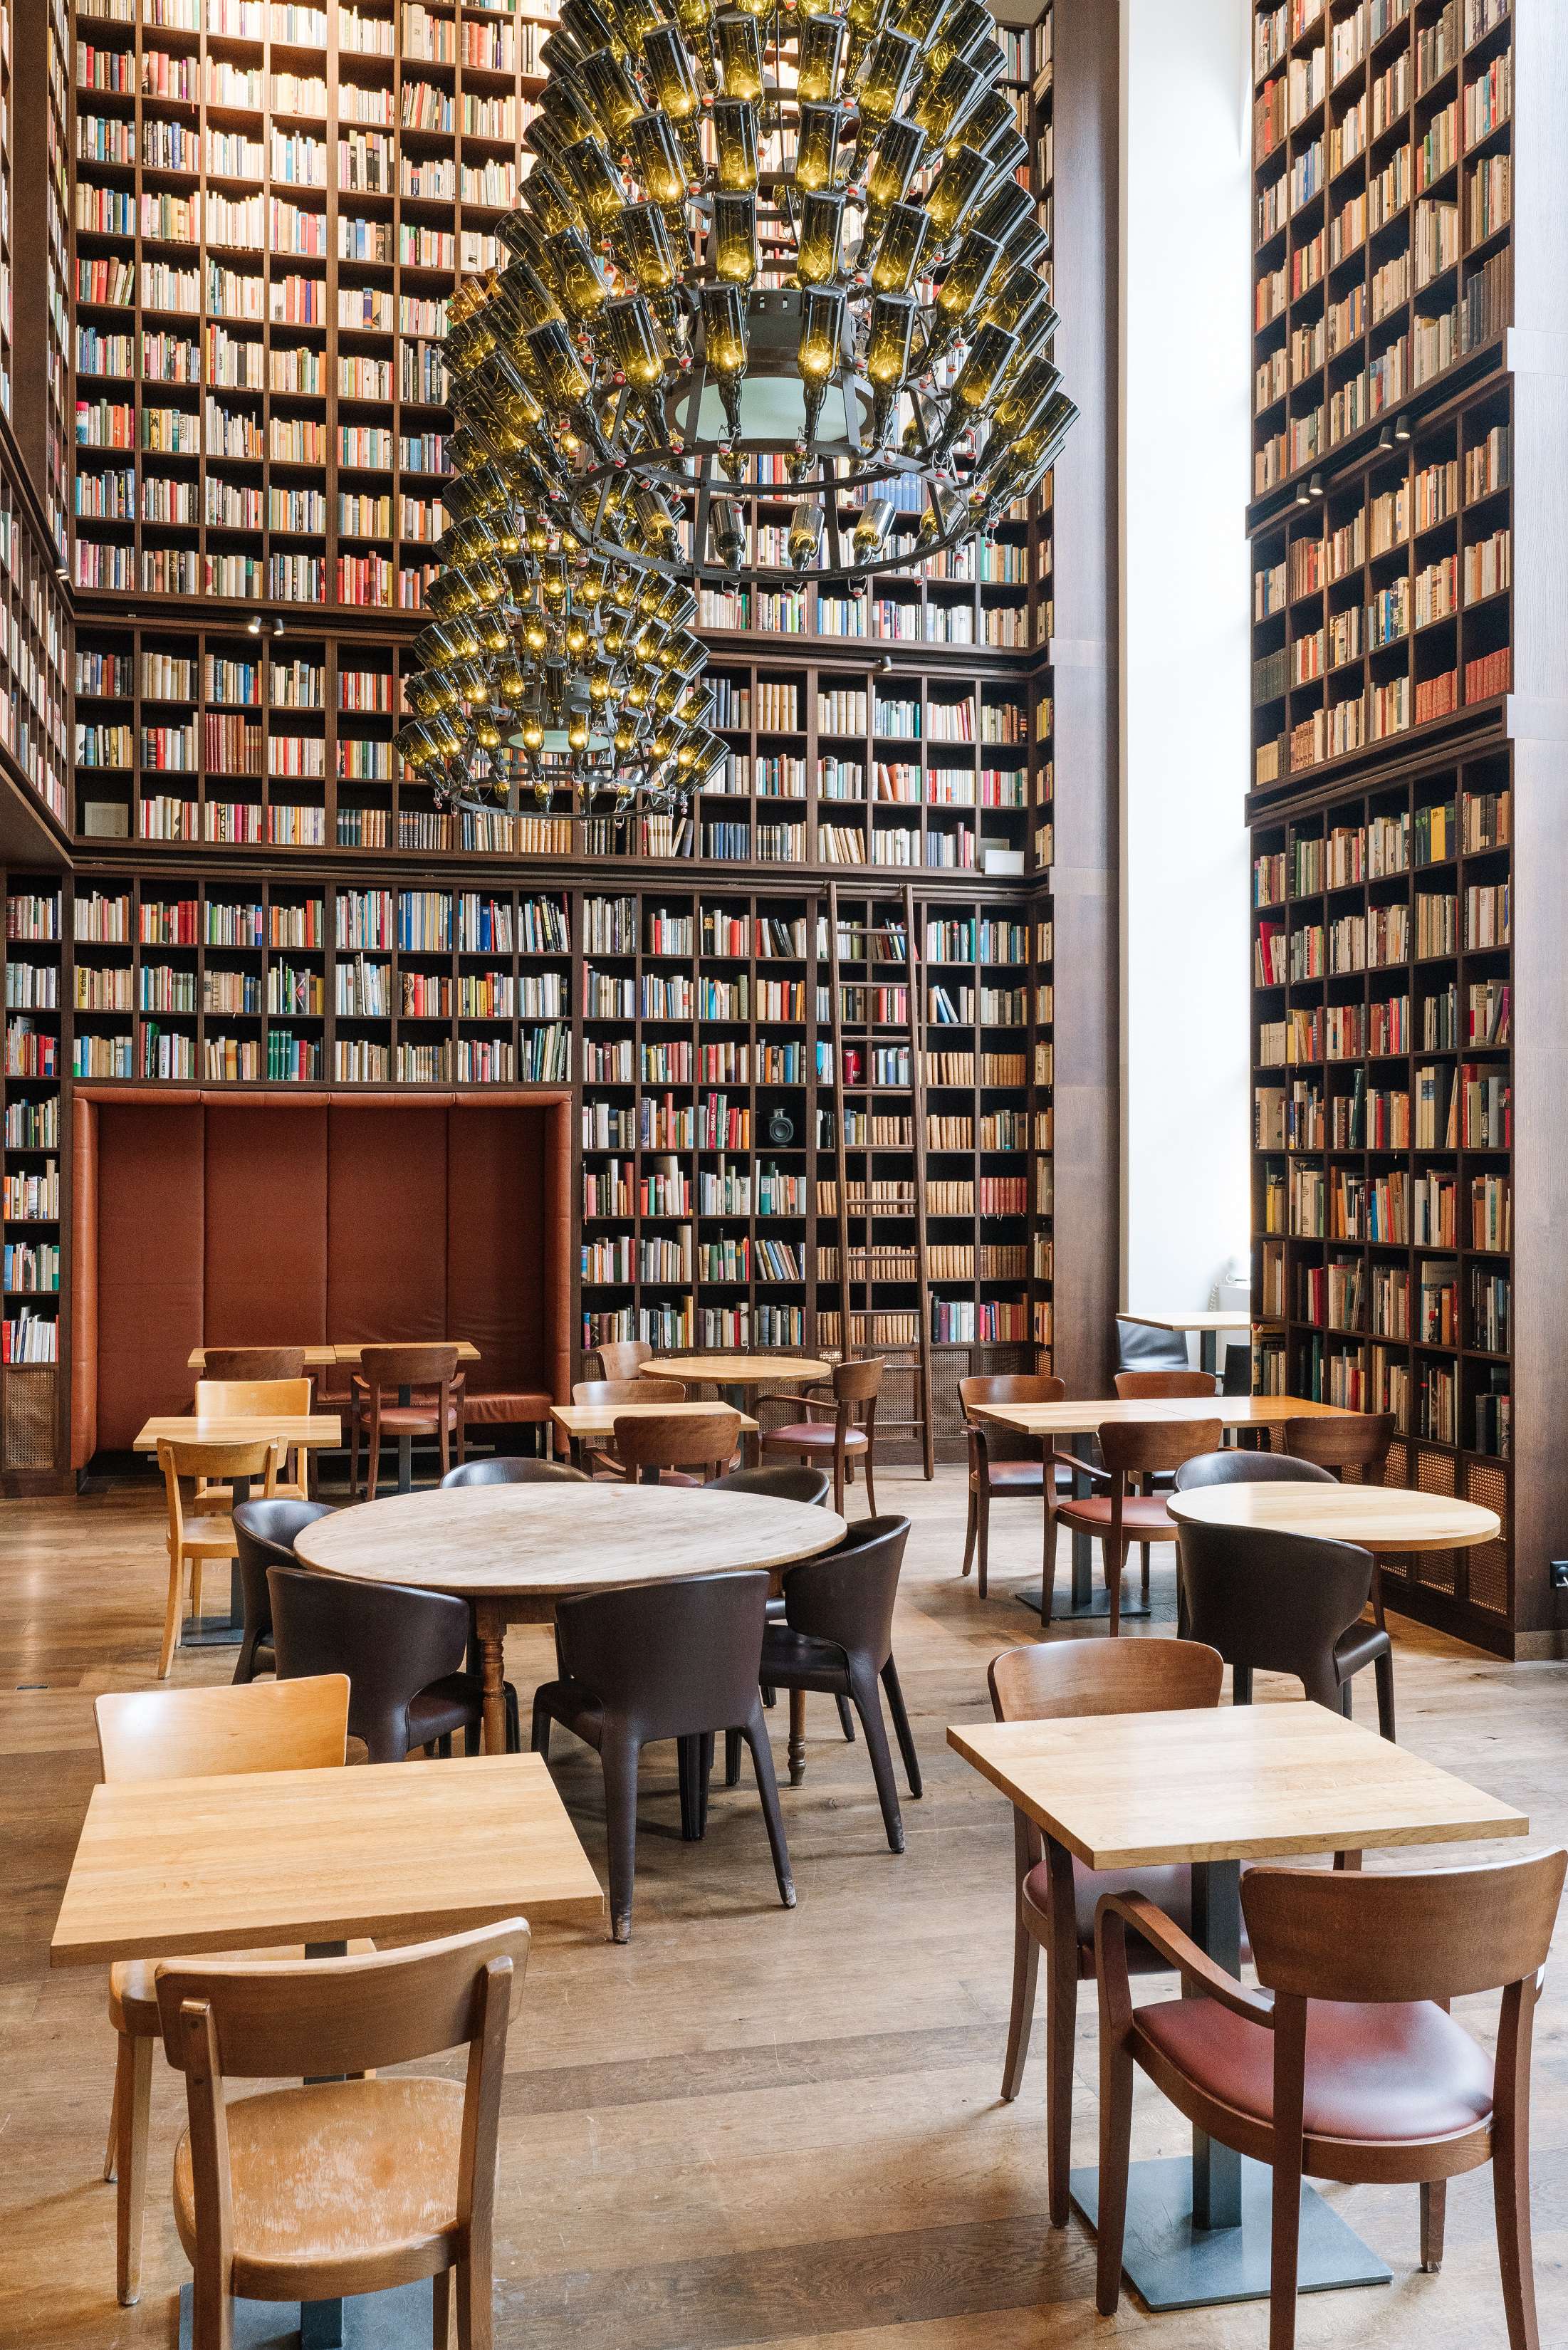 B2 Hotel Library in Zurich with over 33,000 books